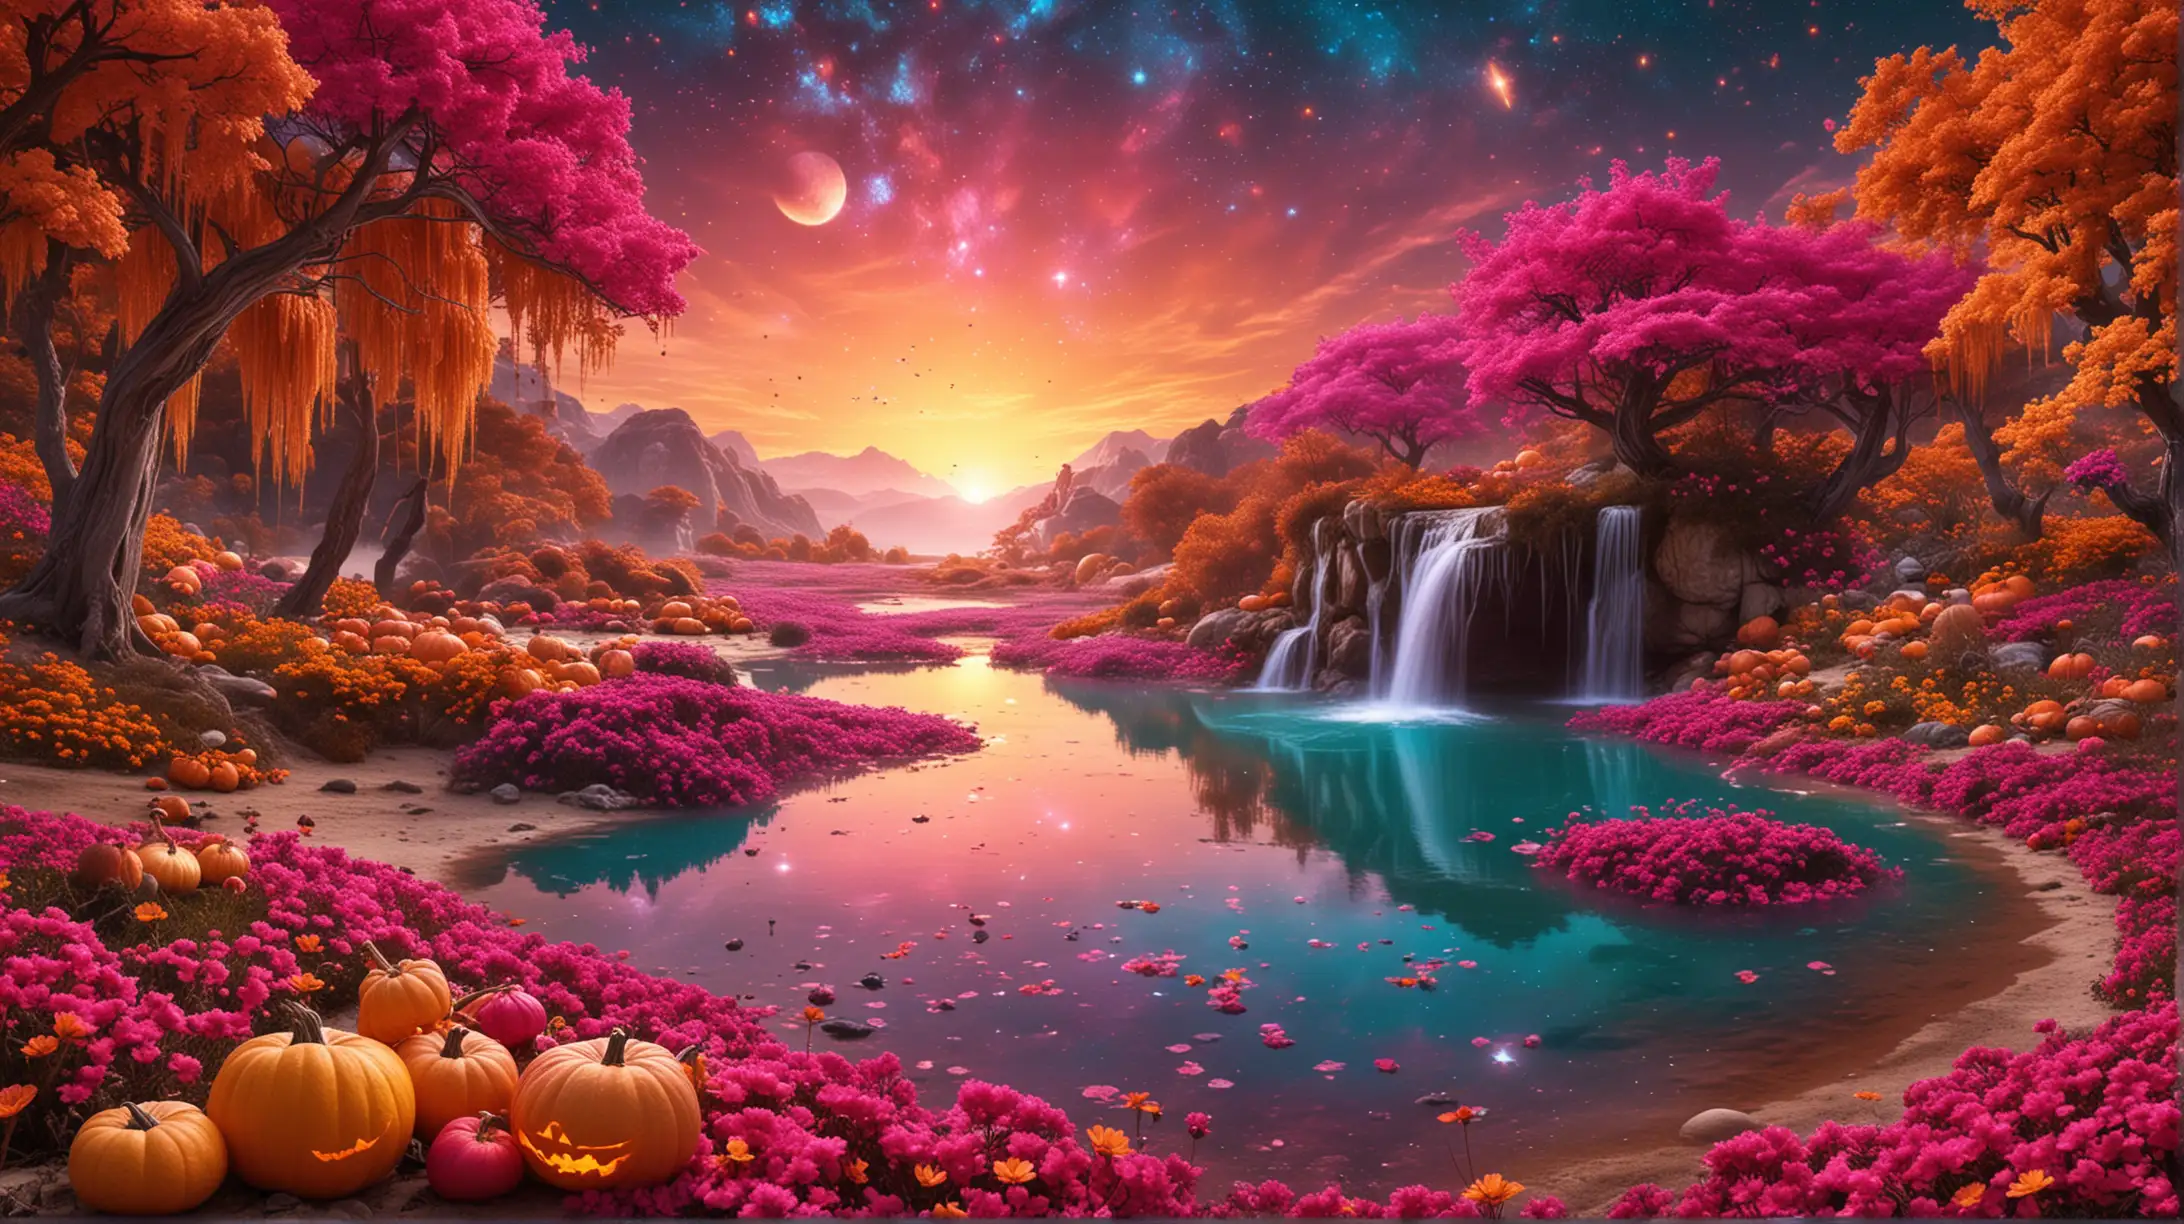 Enchanted Scene with Florescent Fairytale Pumpkins and Turquoise Glowing Lake